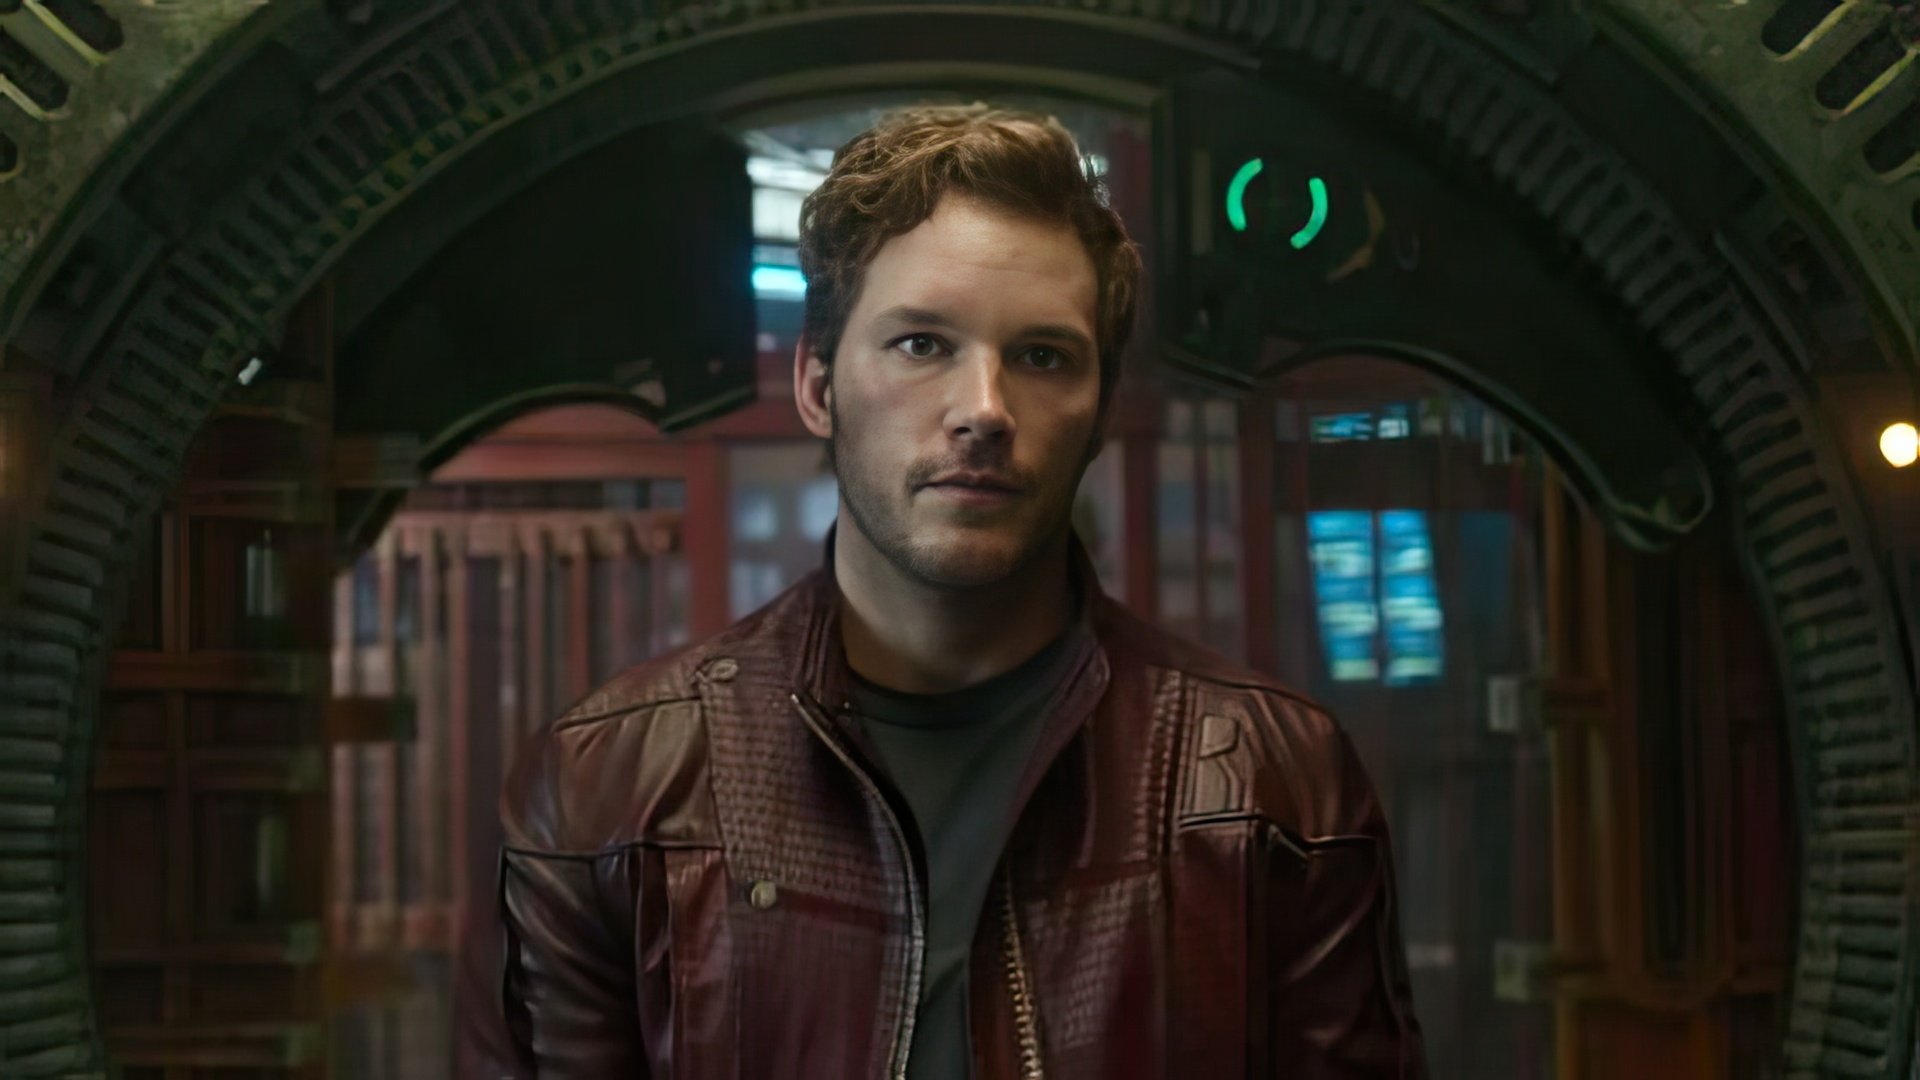 Chris Pratt in the role of Star-Lord